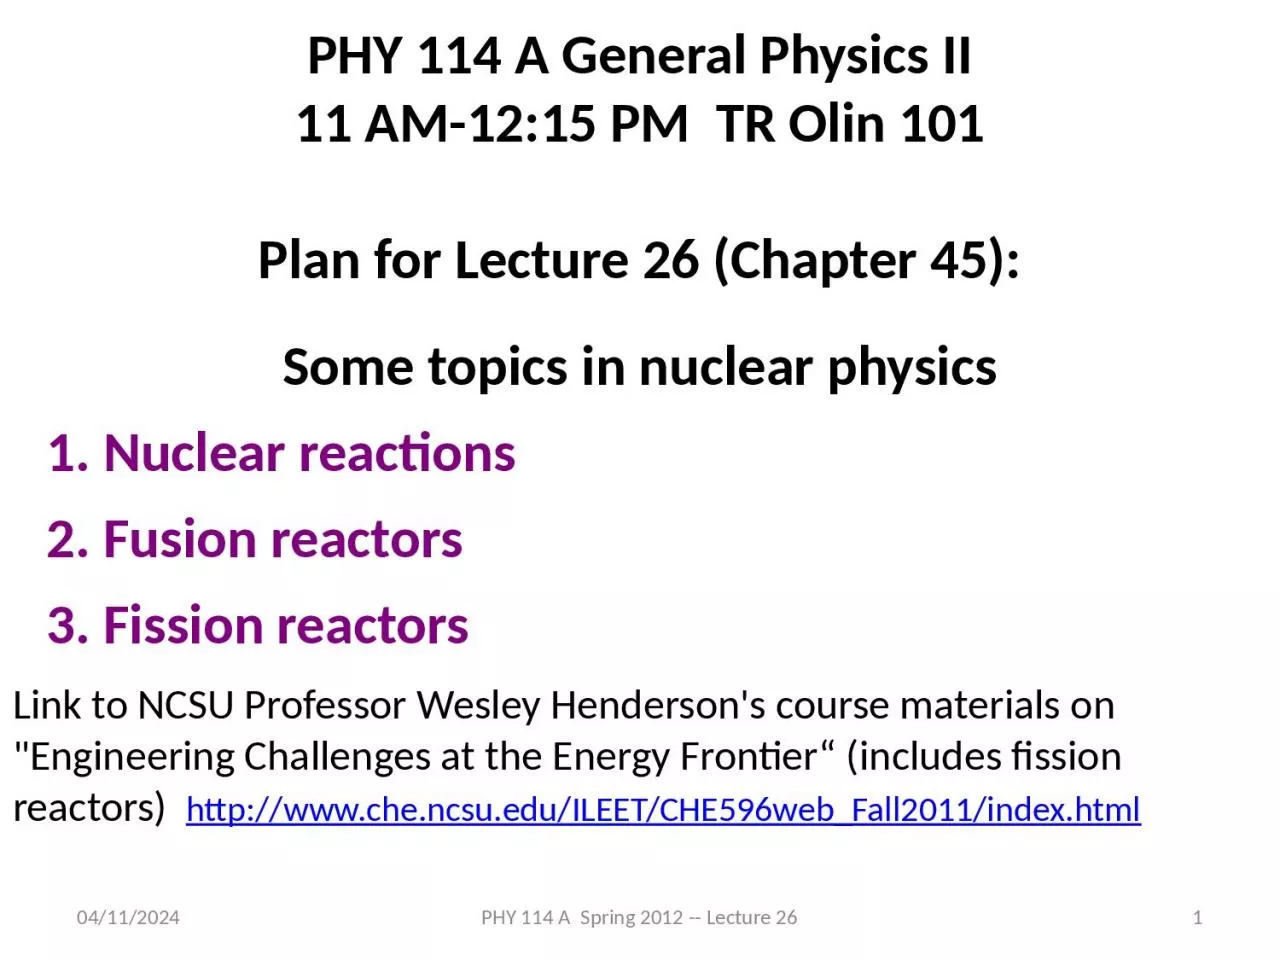 5/1/2012 PHY 114 A  Spring 2012 -- Lecture 26